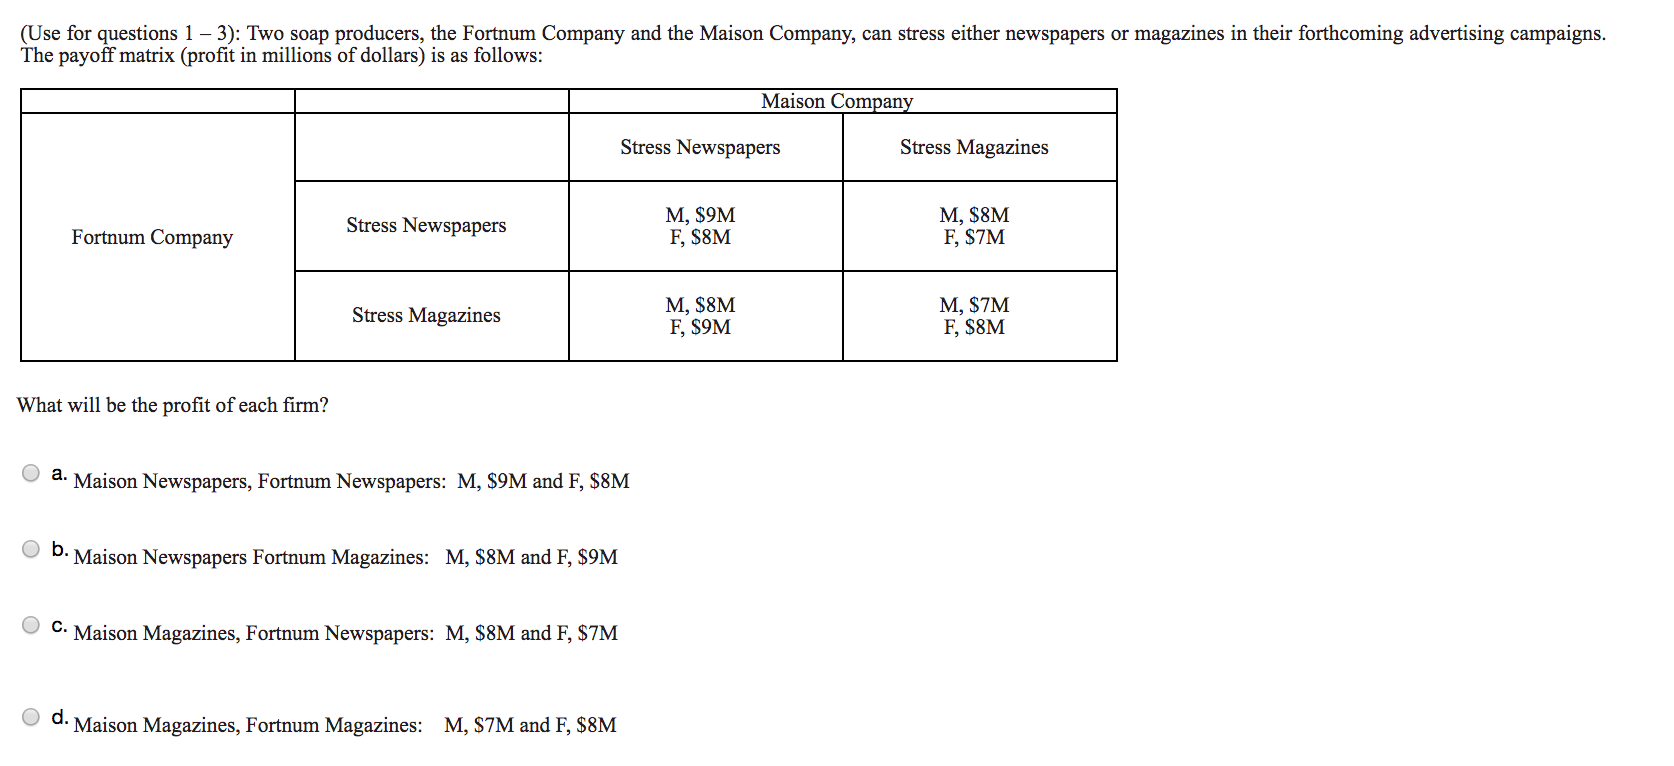 (Use for questions 1 - 3): Two soap producers, the Fortnum Company and the Maison Company,
The payoff matrix (profit in millions of dollars) is as follows:
can stress either newspapers or magazines in their forthcoming advertising campaigns.
Maison Company
Stress Newspapers
Stress Magazines
М, S9M
F, S8M
M, $8M
F, $7M
Stress Newspapers
Fortnum Company
М, S8M
F, $9M
М, $7M
F, $8M
Stress Magazines
What will be the profit of each firm?
a. Maison Newspapers, Fortnum Newspapers: M, $9M and F, $8M
D. Maison Newspapers Fortnum Magazines:
M, $8M and F, $9M
C.Maison Magazines, Fortnum Newspapers: M, $8M and F, $7M
M, $7M and F, $8M
Maison Magazines, Fortnum Magazines:
